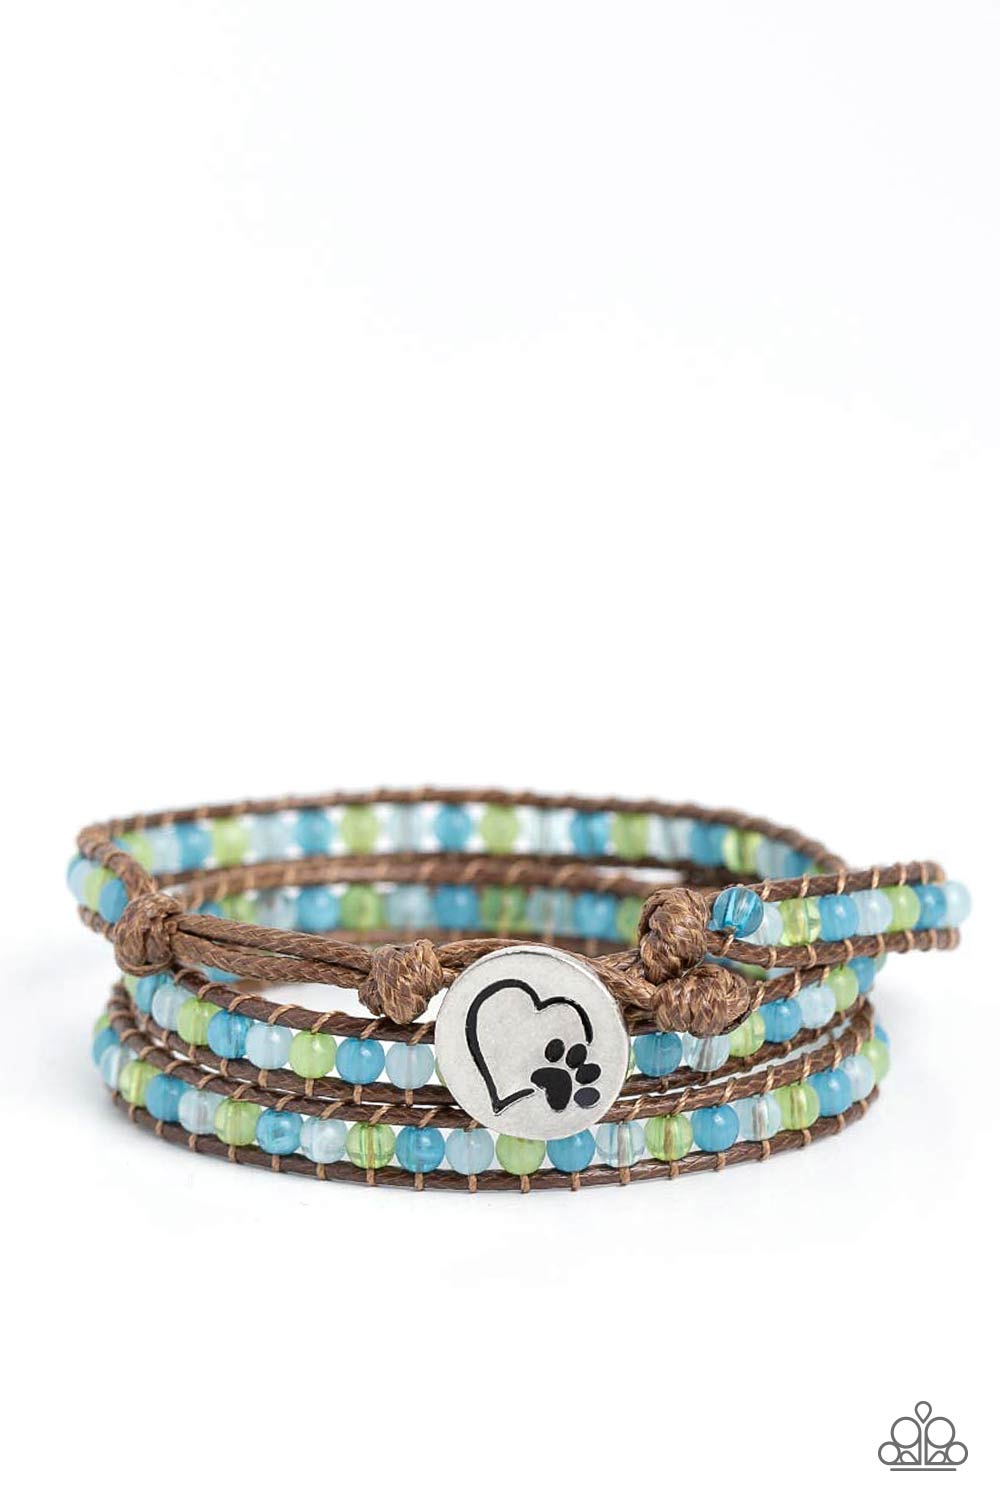 Paparazzi Accessories - PAW-sitive Thinking - Blue Bracelets infused with an antiqued heart and pawprint embossed button, a row of blue and green multicolored cloudy and milky beads are knotted in place along two brown leather cords, creating multiple earthy layers around the wrist with its extended length. Features an adjustable button loop closure.  Sold as one individual bracelet.